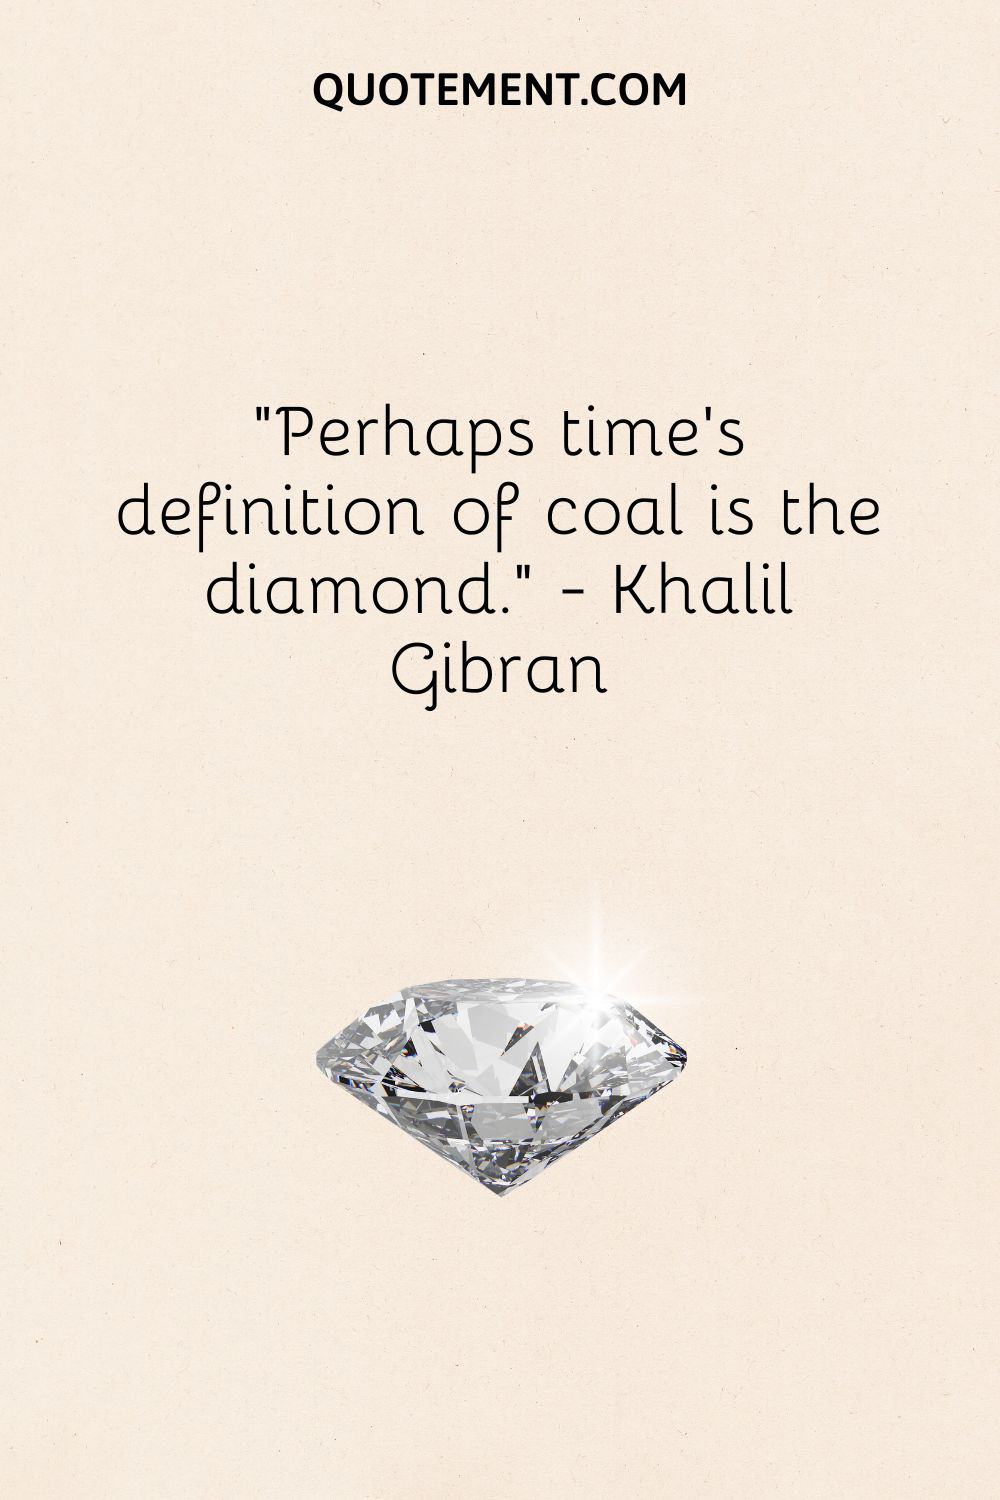 Perhaps time’s definition of coal is the diamond.